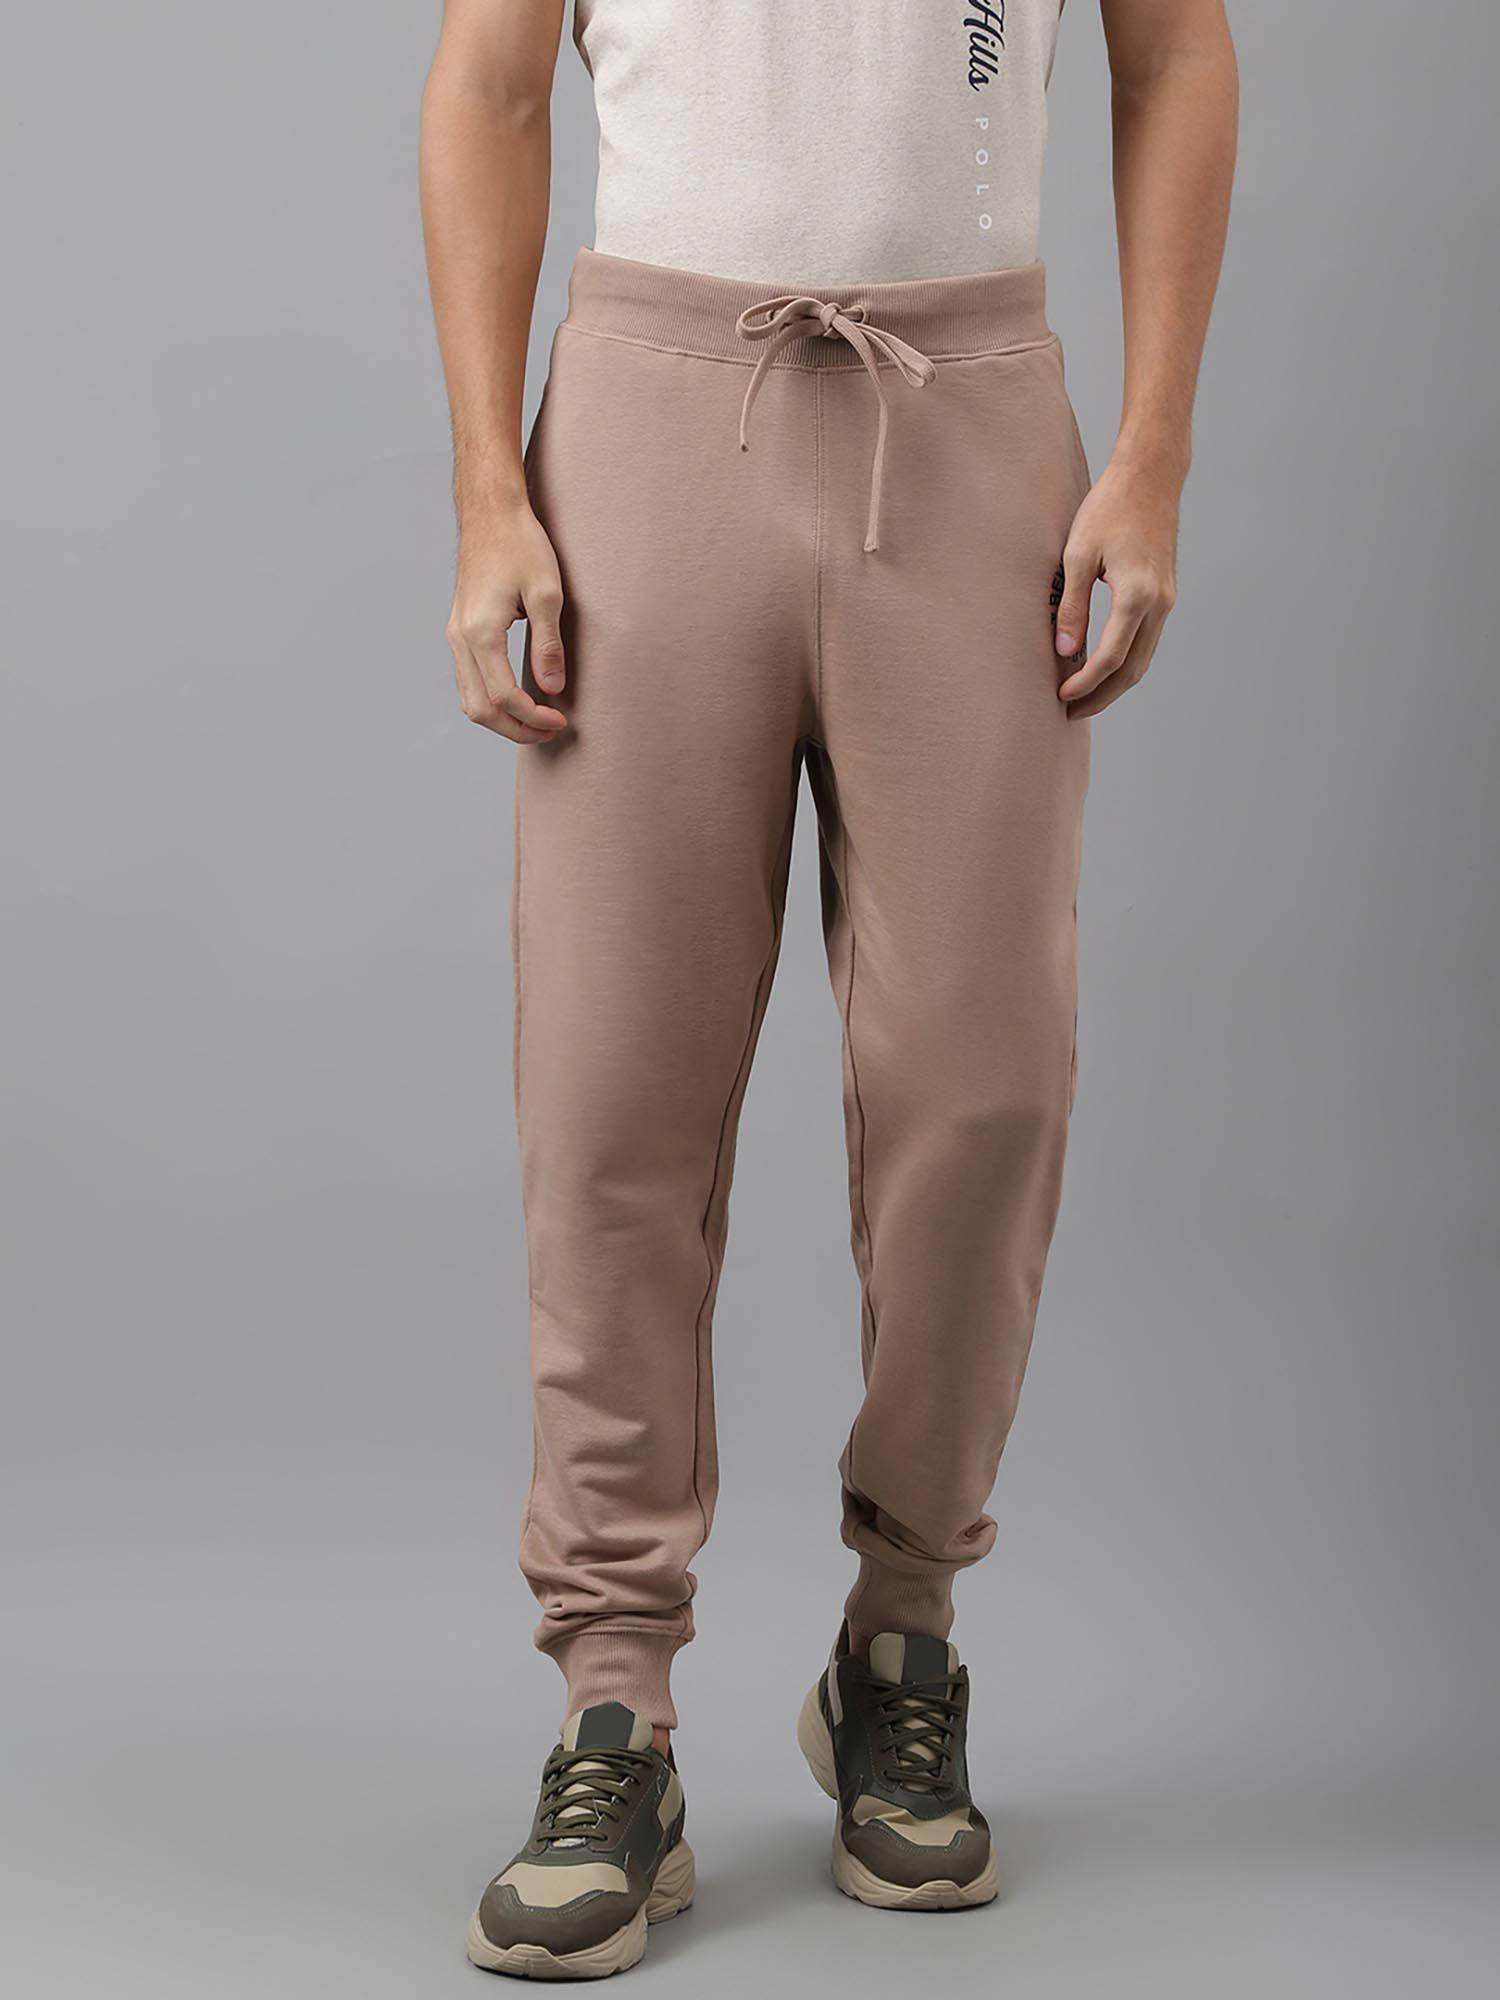 worn out west joggers